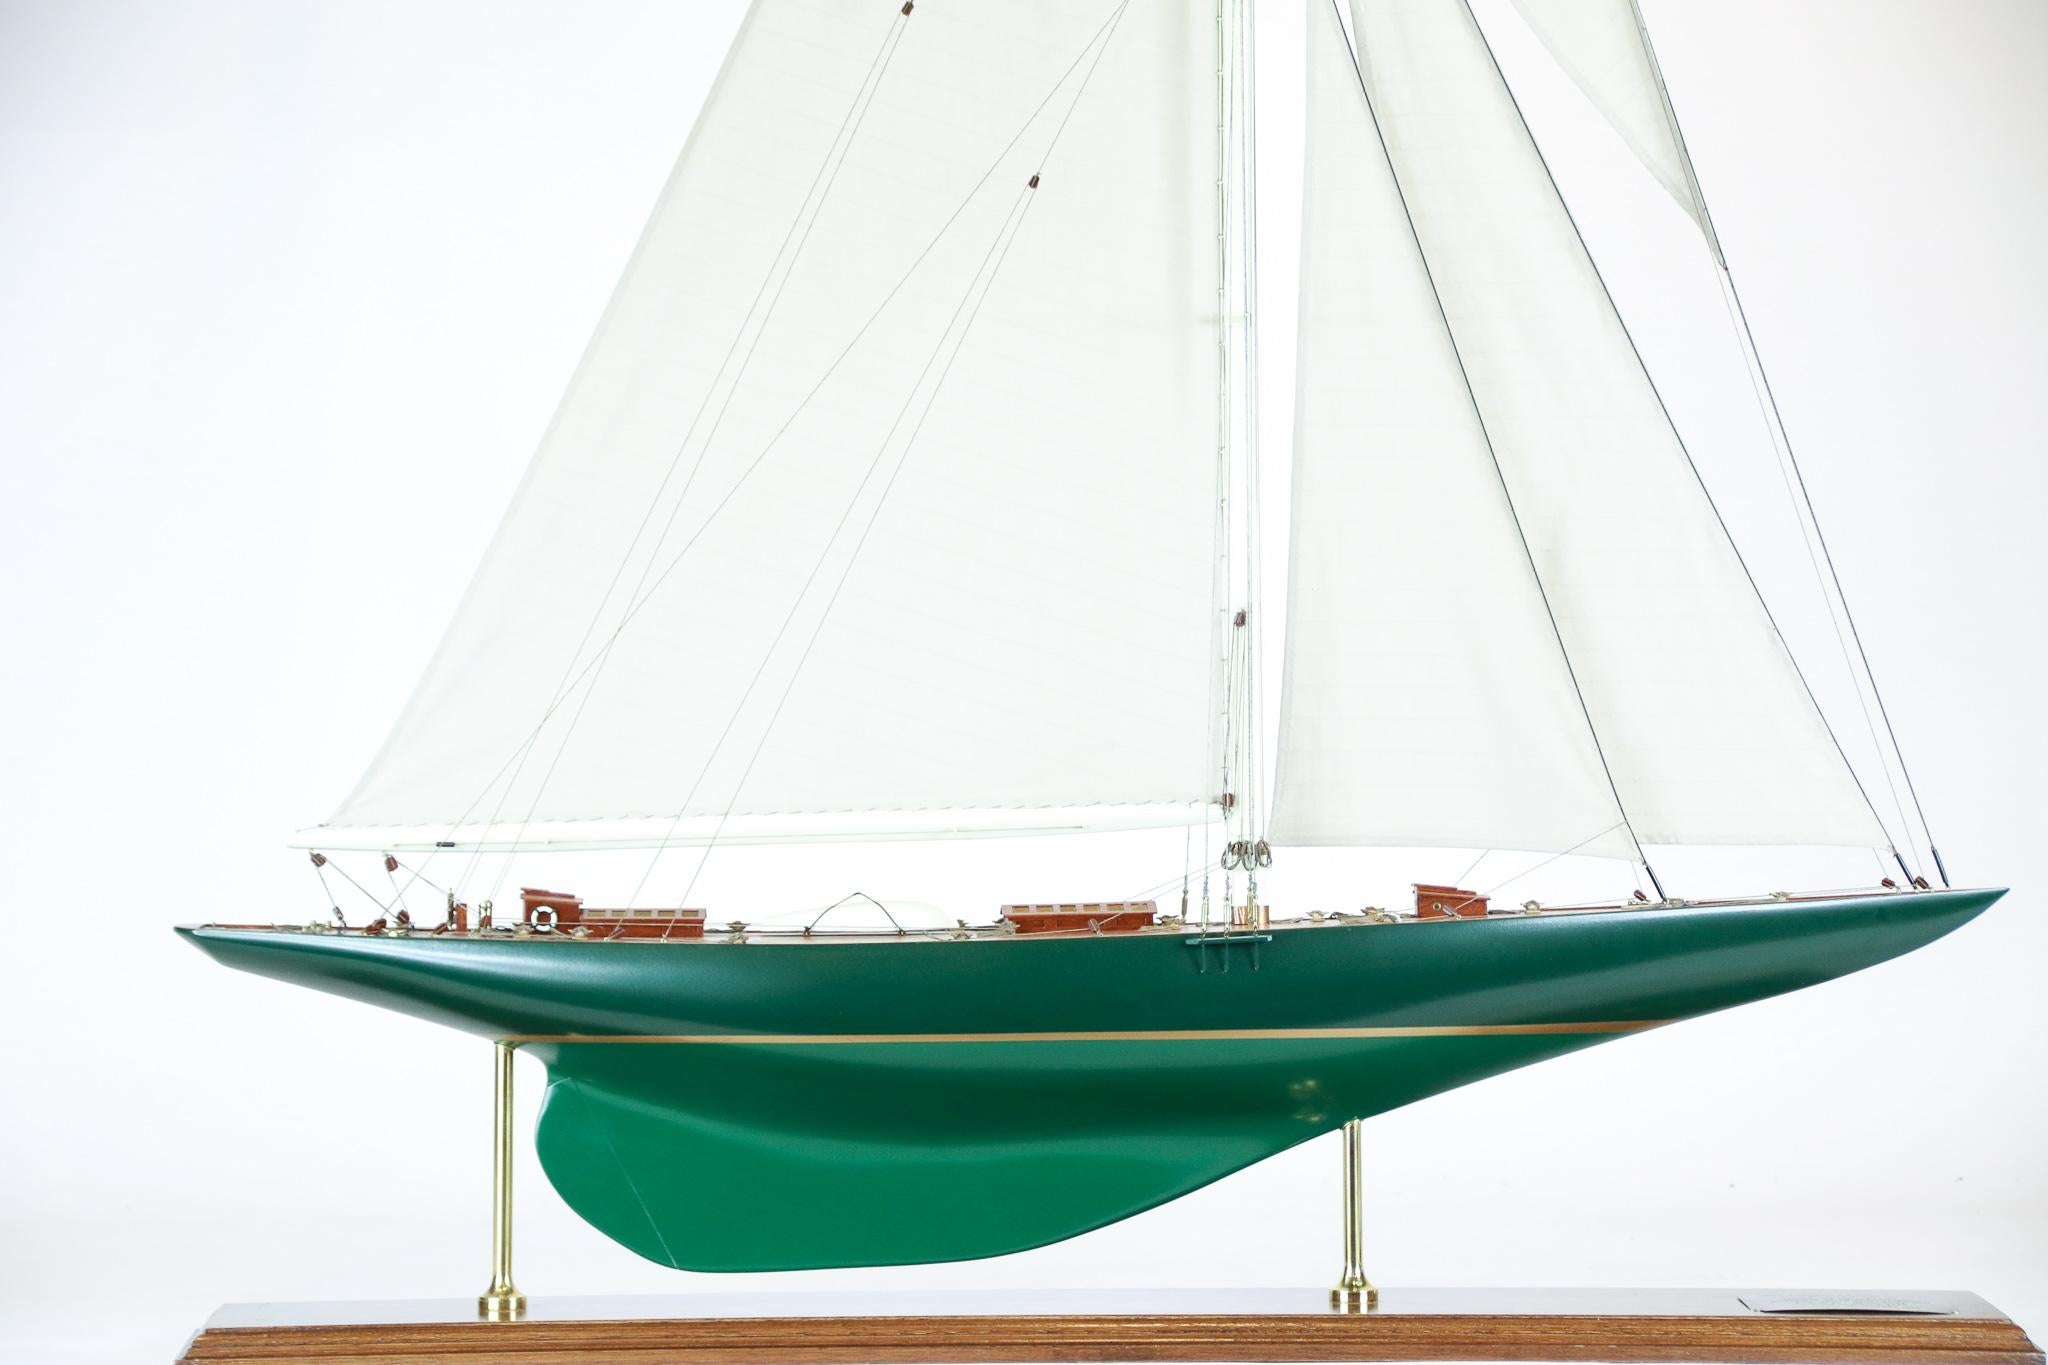 Model of Sir Thomas Lipton's America's Cup challenger Shamrock V of 1930. Shamrock sailed under the Royal Ulster Yacht Club against the New York Yacht Club's Enterprise. 

Shamrock V was built from wood, with mahogany planking over steel frames